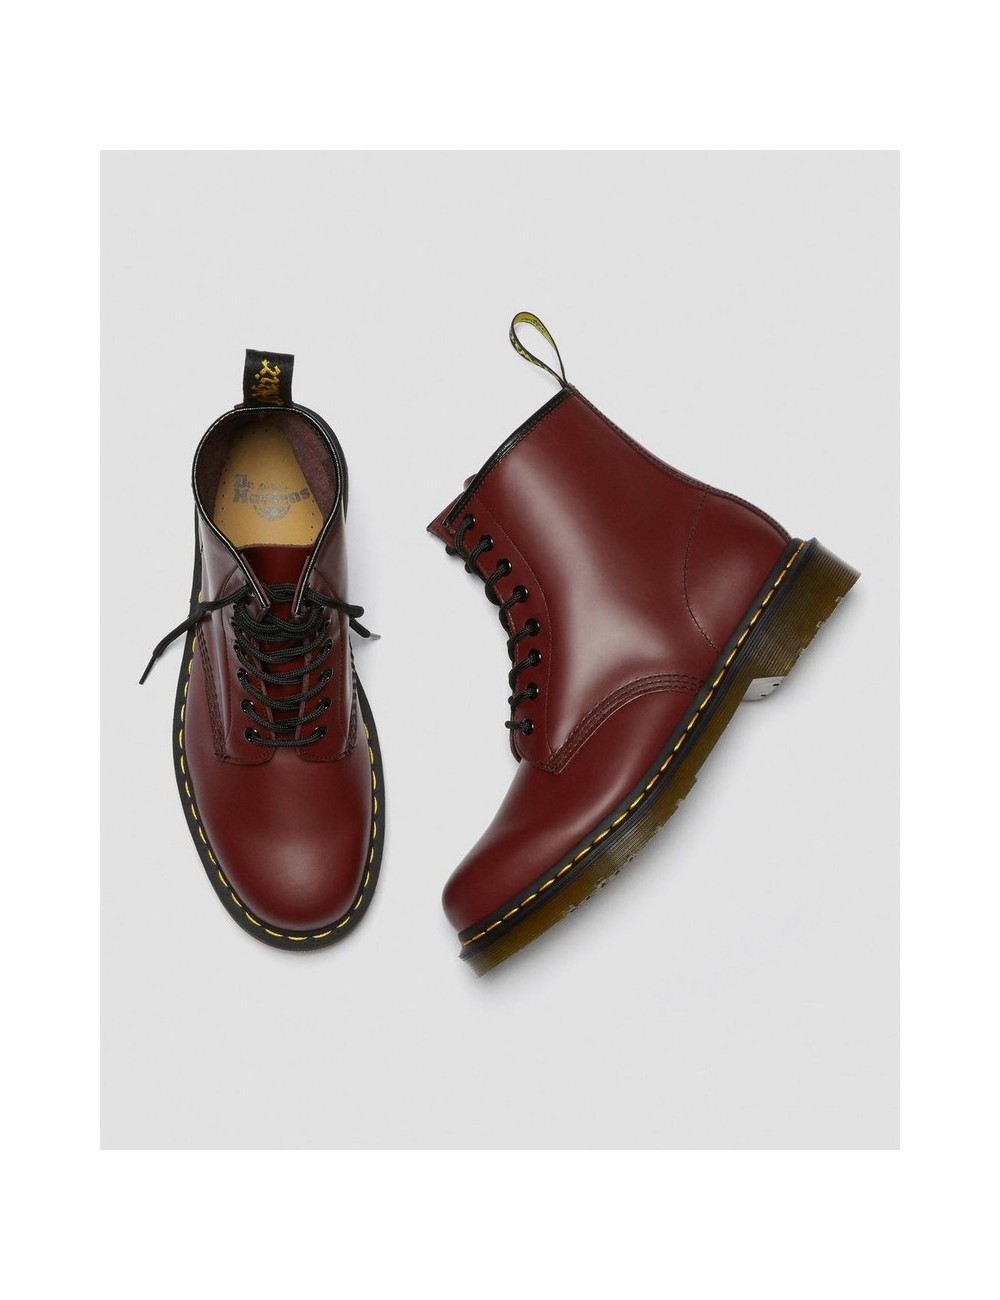 BOTAS UNISEX DR MARTENS 1460 SMOOTH CHERRY RED